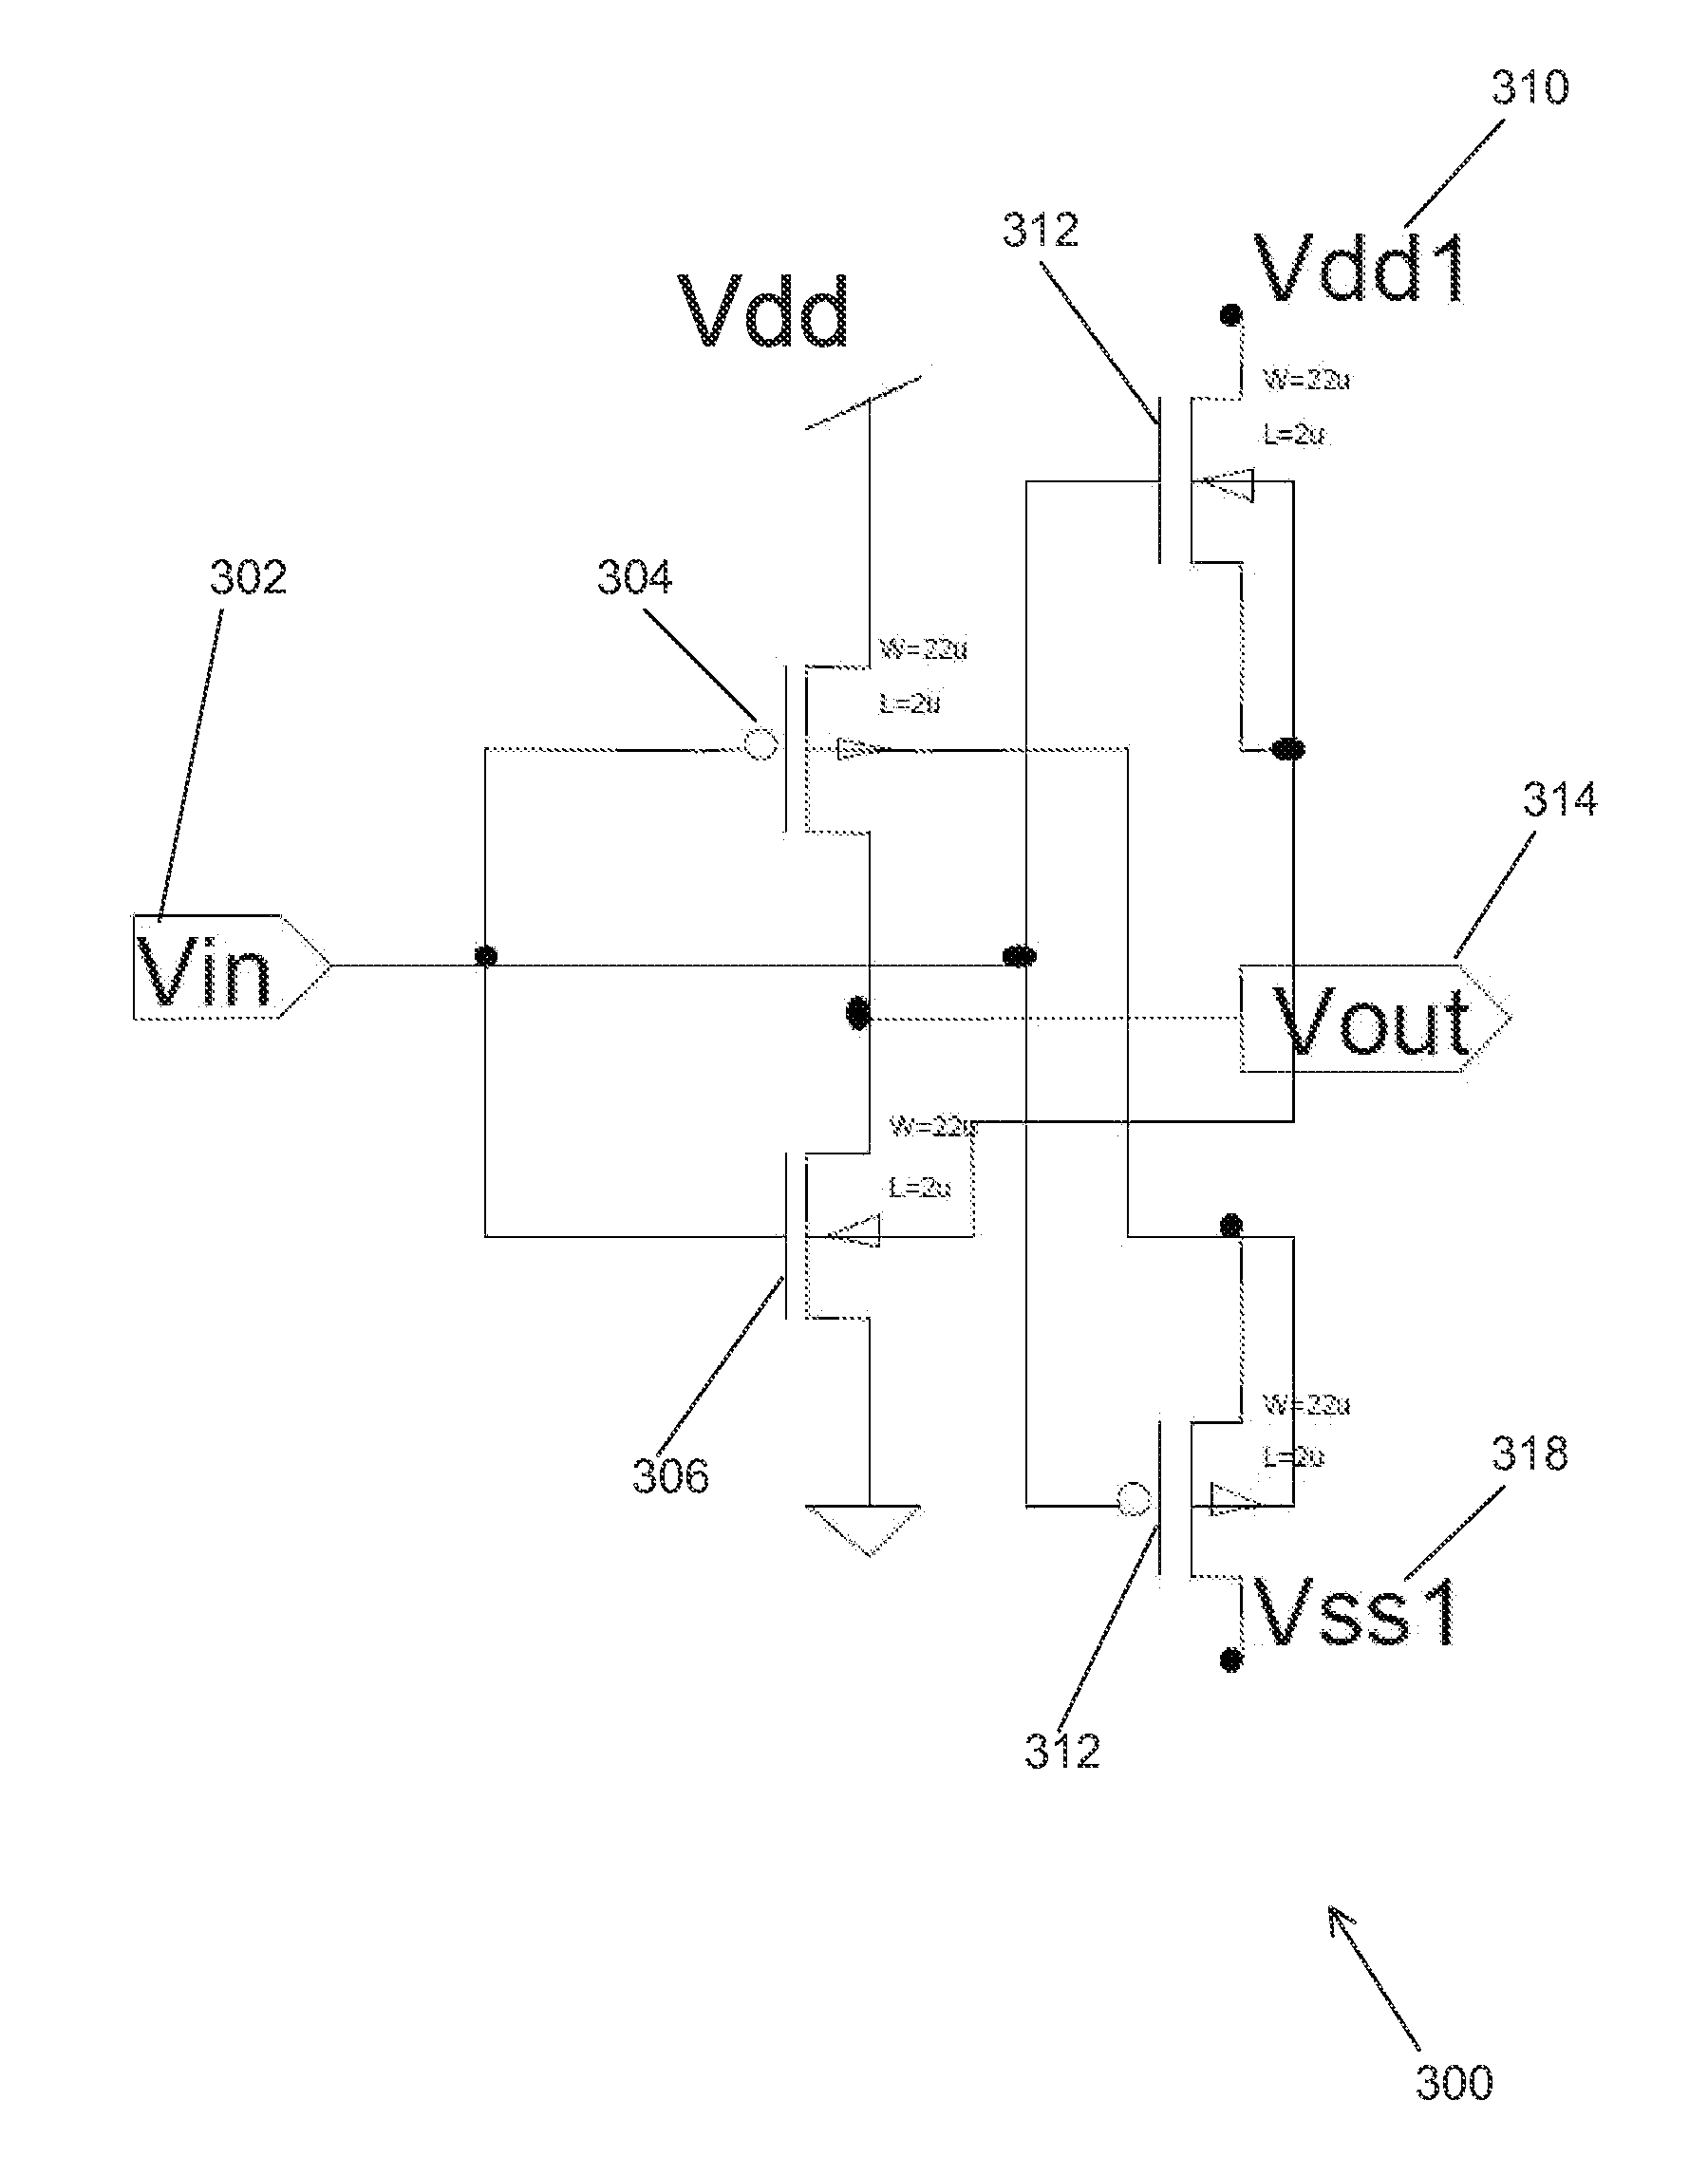 Systems and methods for dynamic mosfet body biasing for low power, fast response VLSI applications